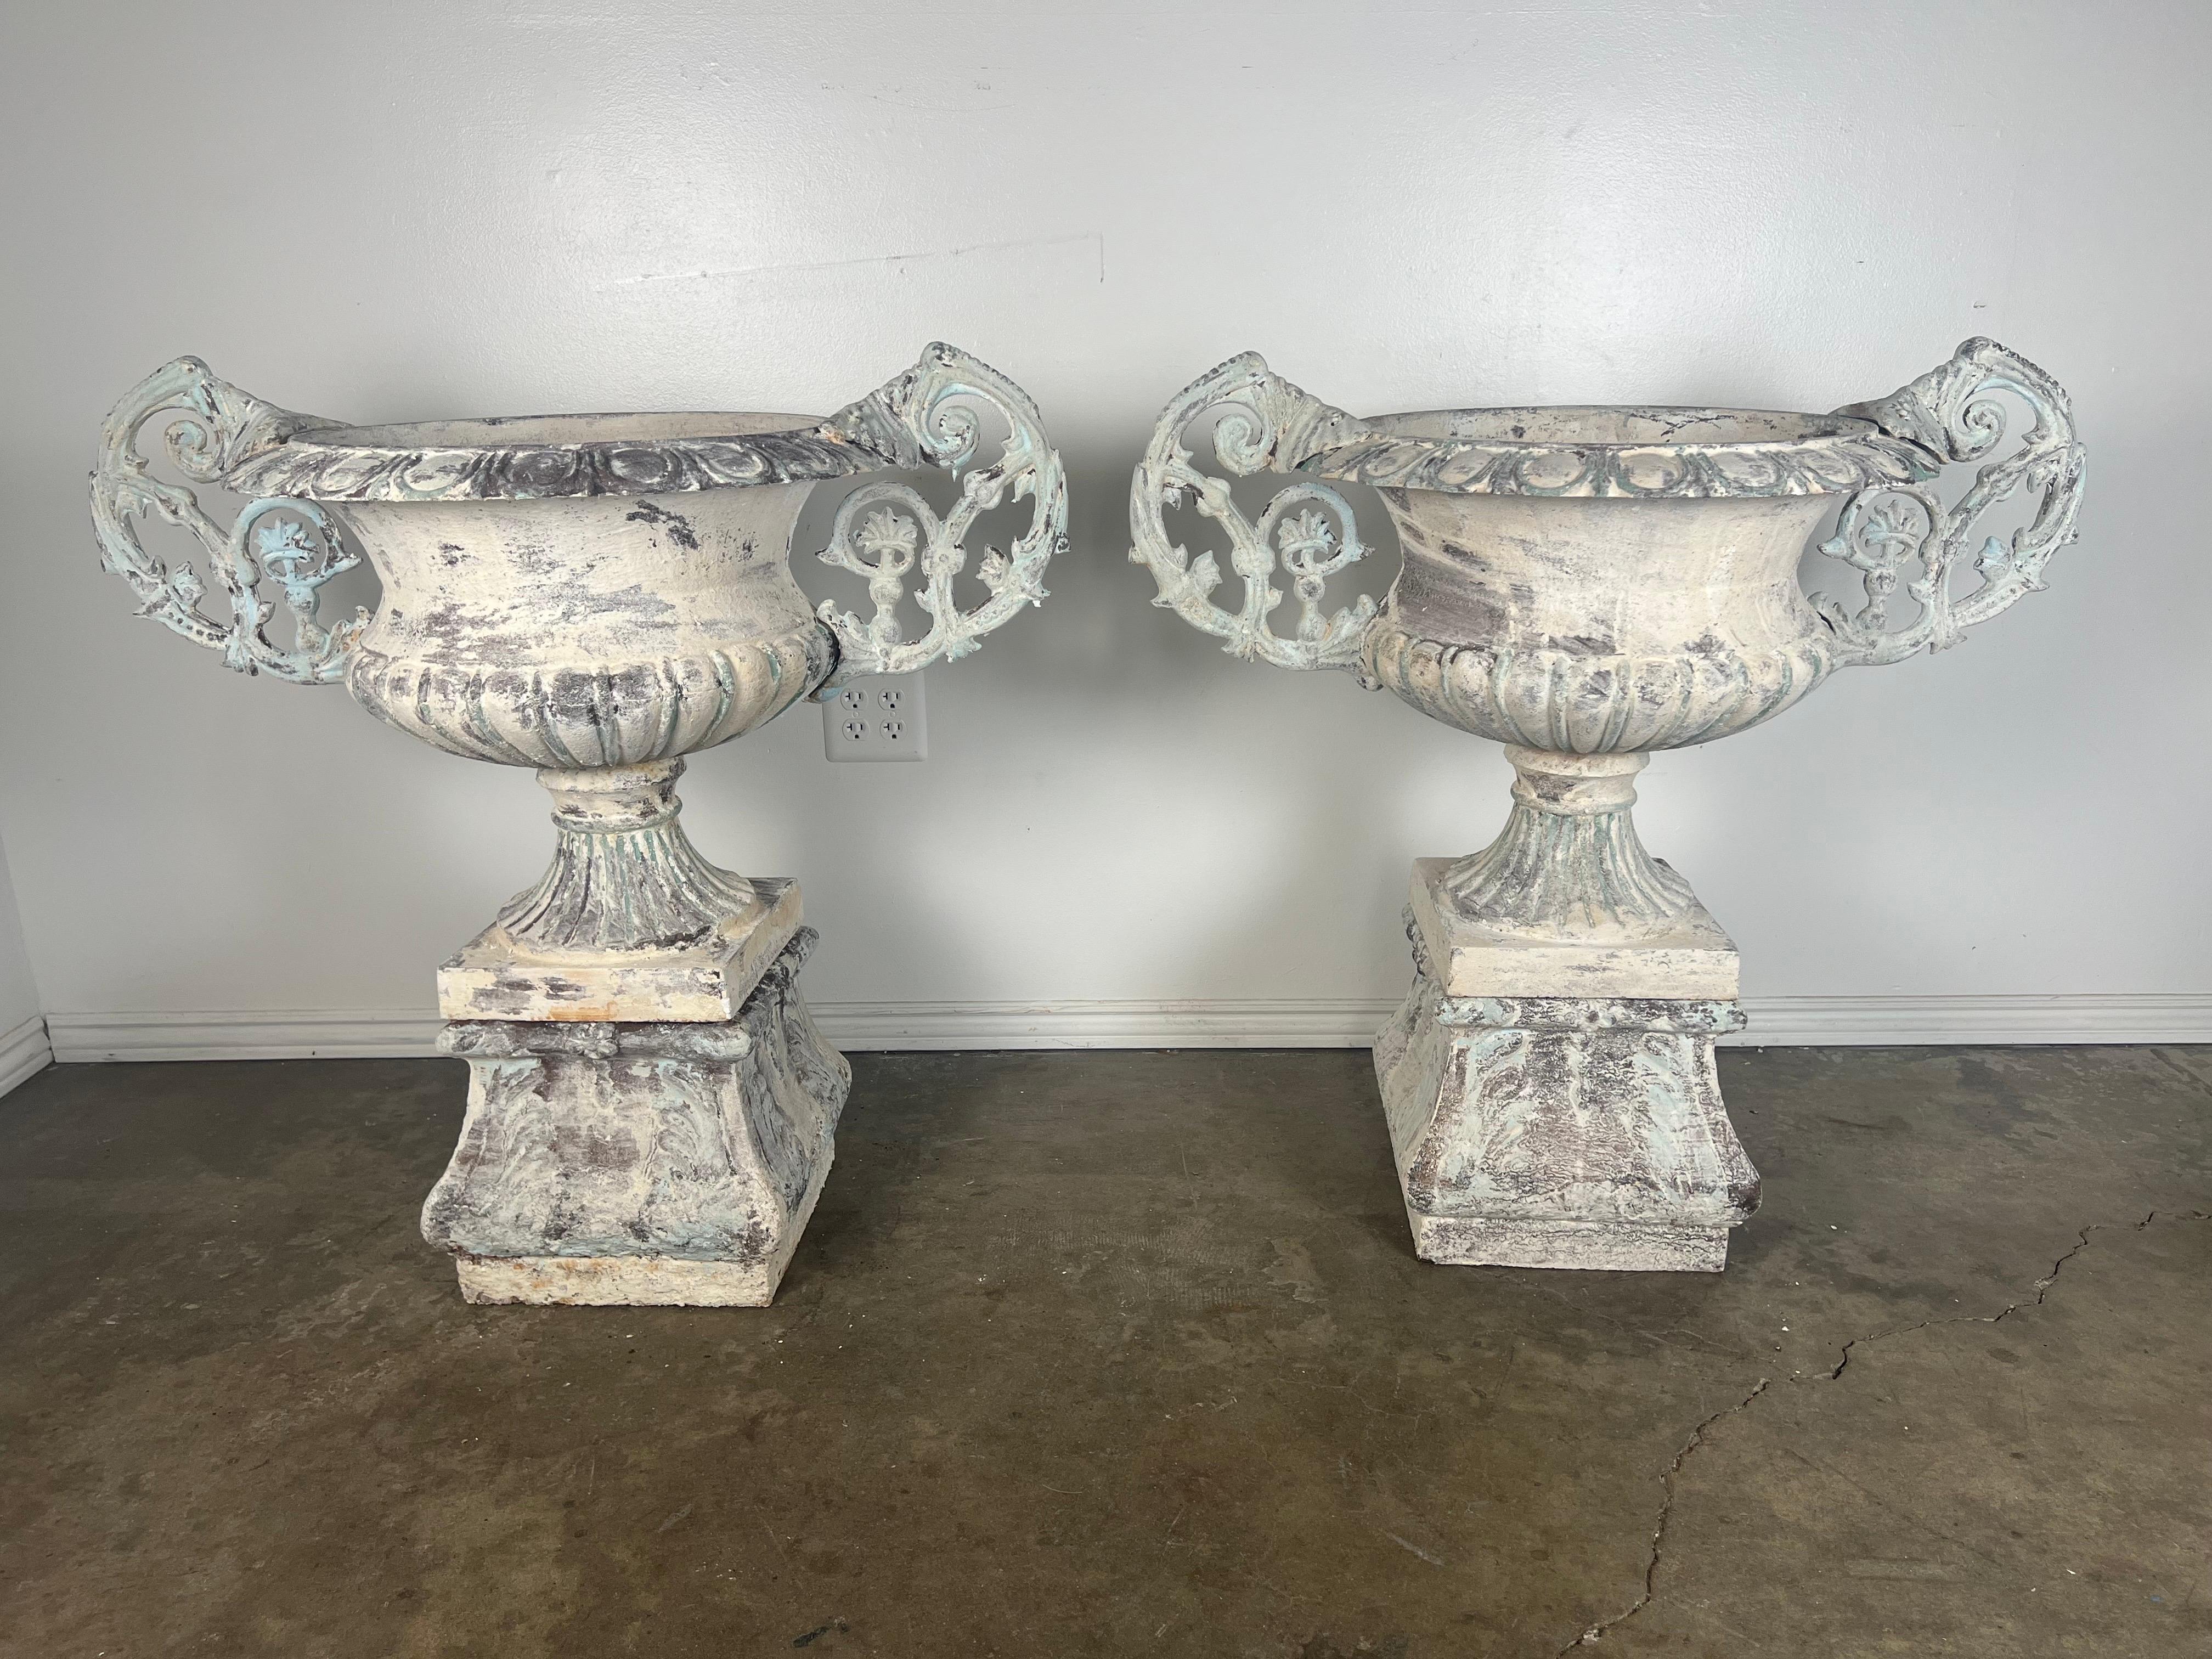 A pair of 19th century French cast iron painted garden urn planters, with weathered paint and rusted patina.   Nicely cast scrolled details on the double handles.